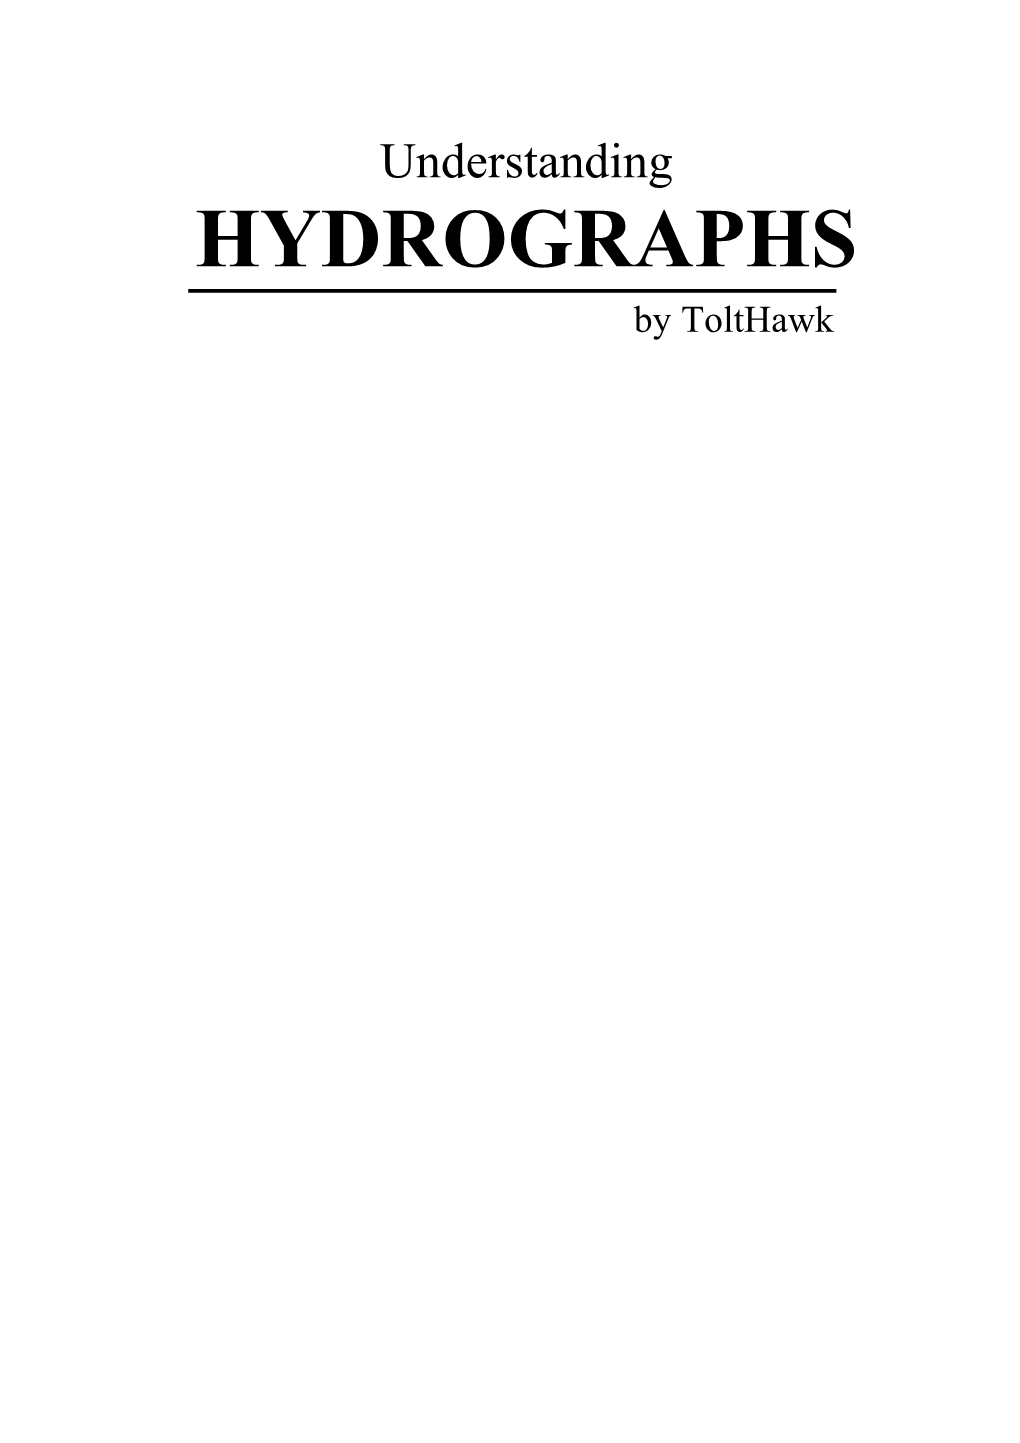 HYDROGRAPHS by Tolthawk Table of Contents 1